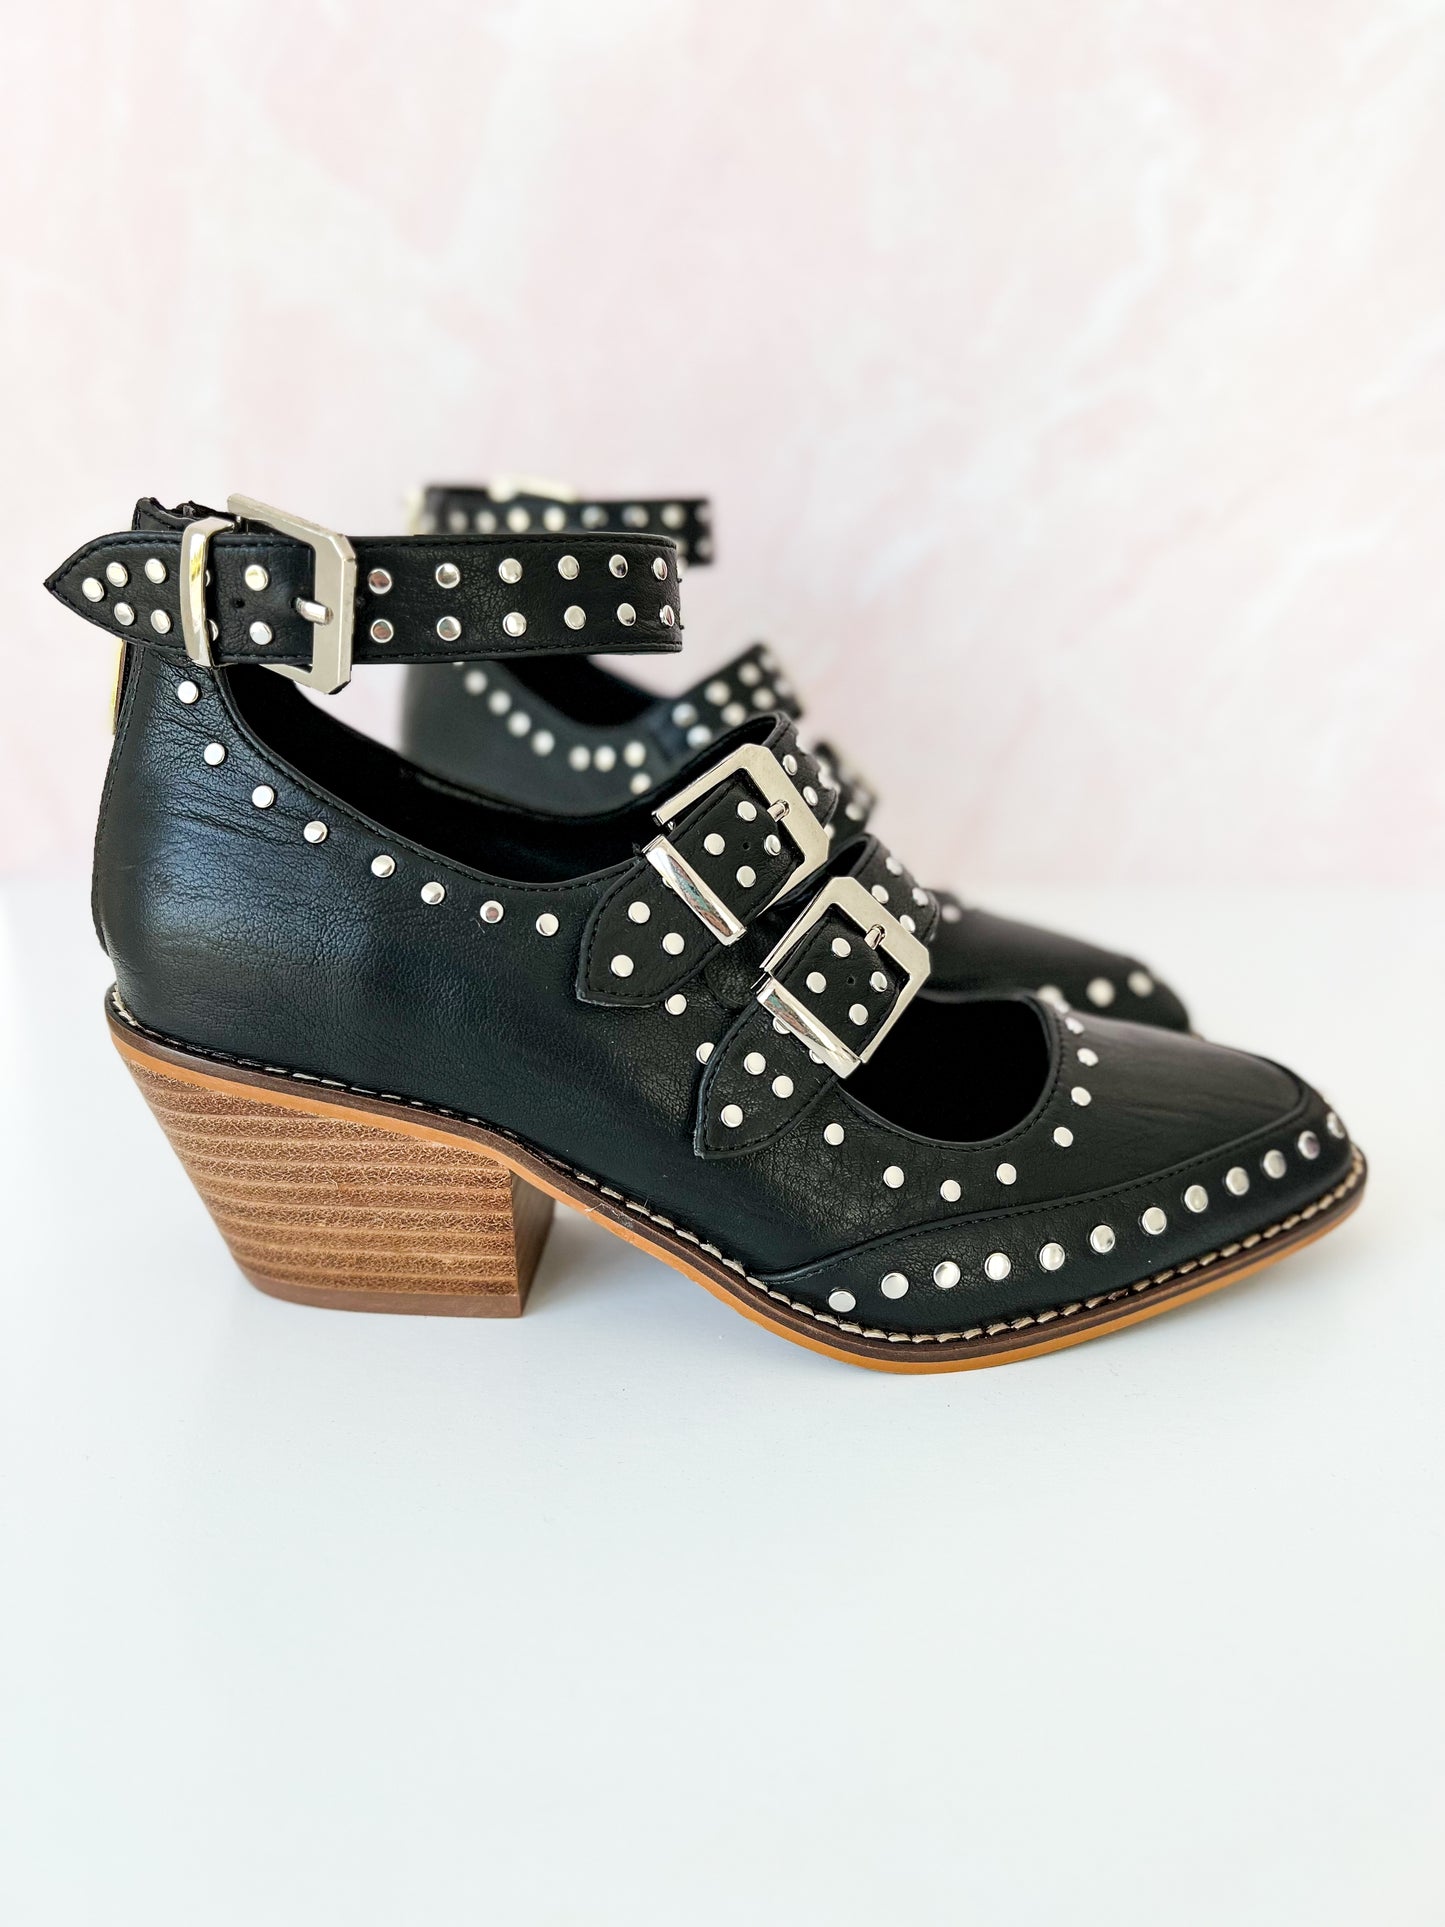 Corky's Cackle Wedge - Black